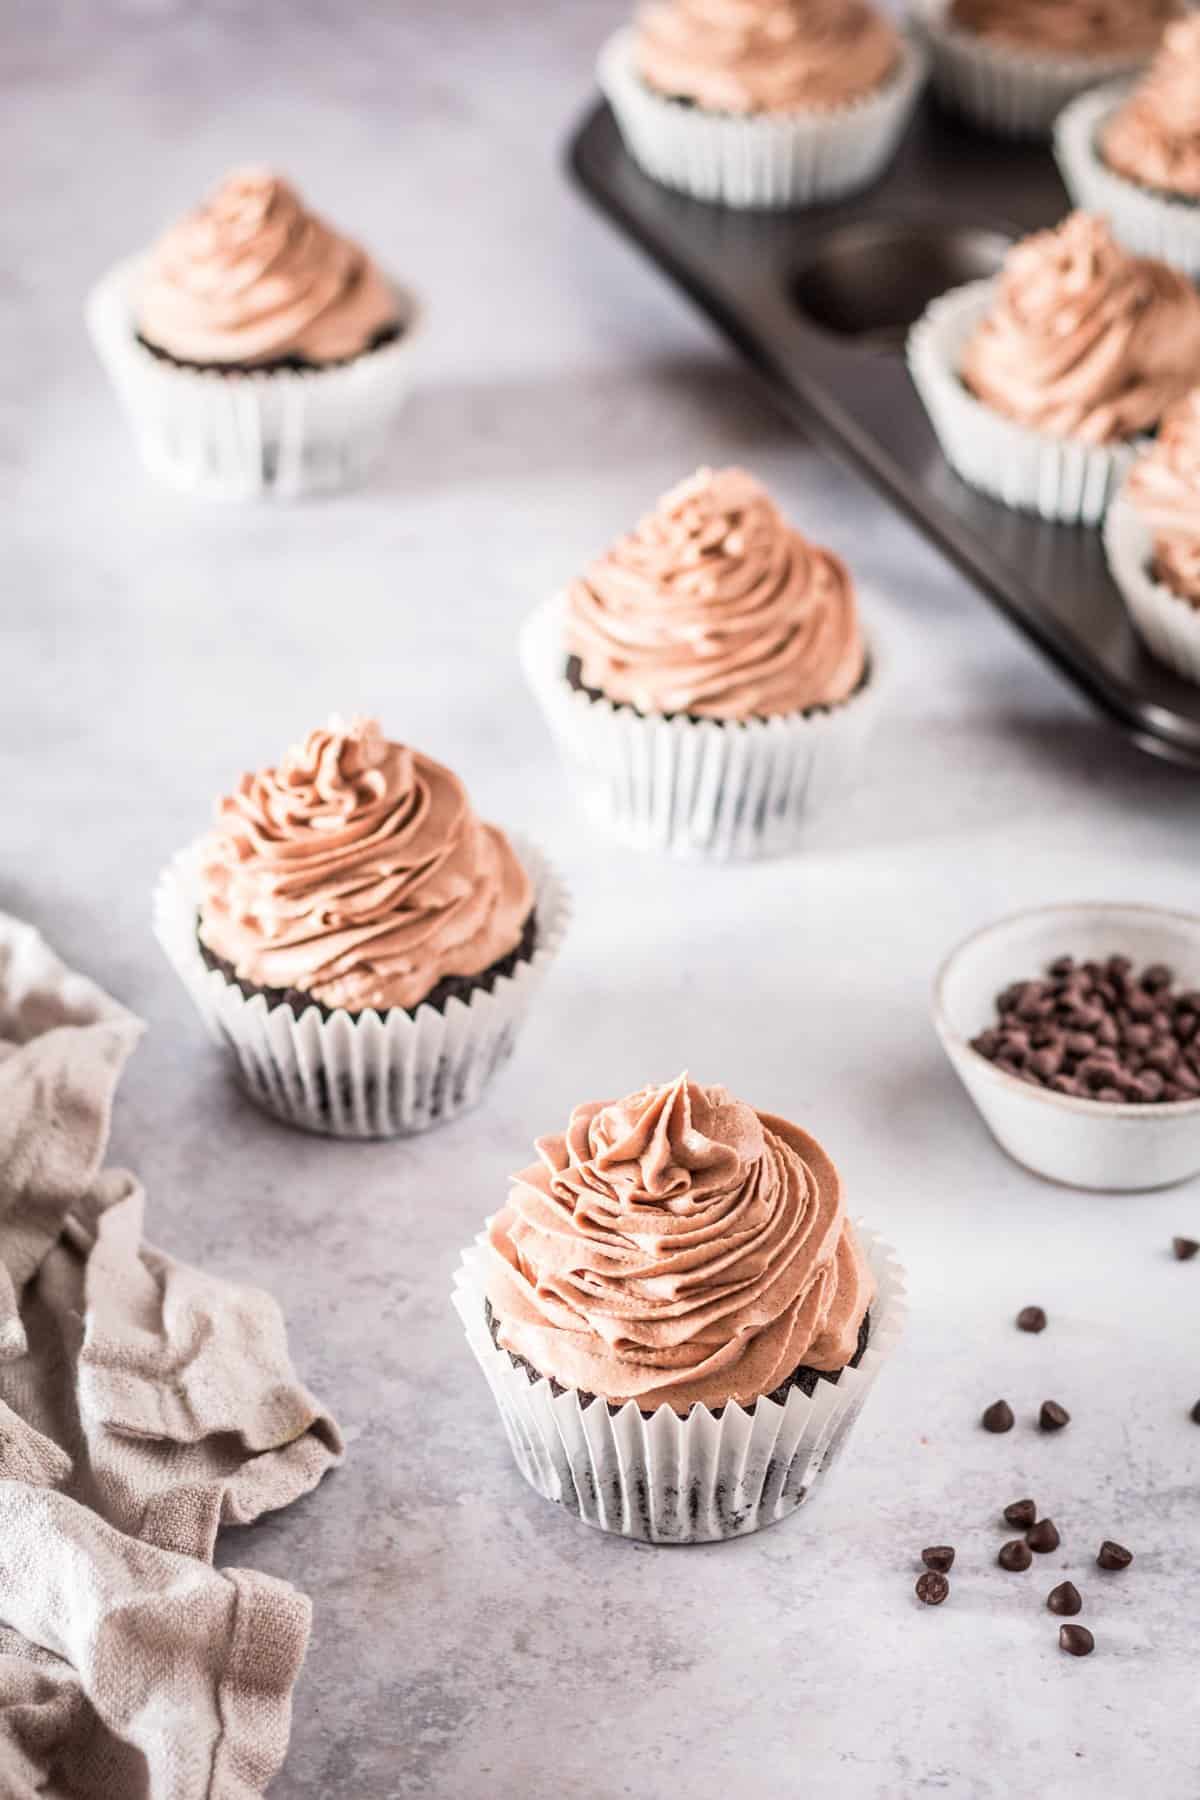 Simply Perfect Chocolate Cupcakes - Moist deeply chocolate-y